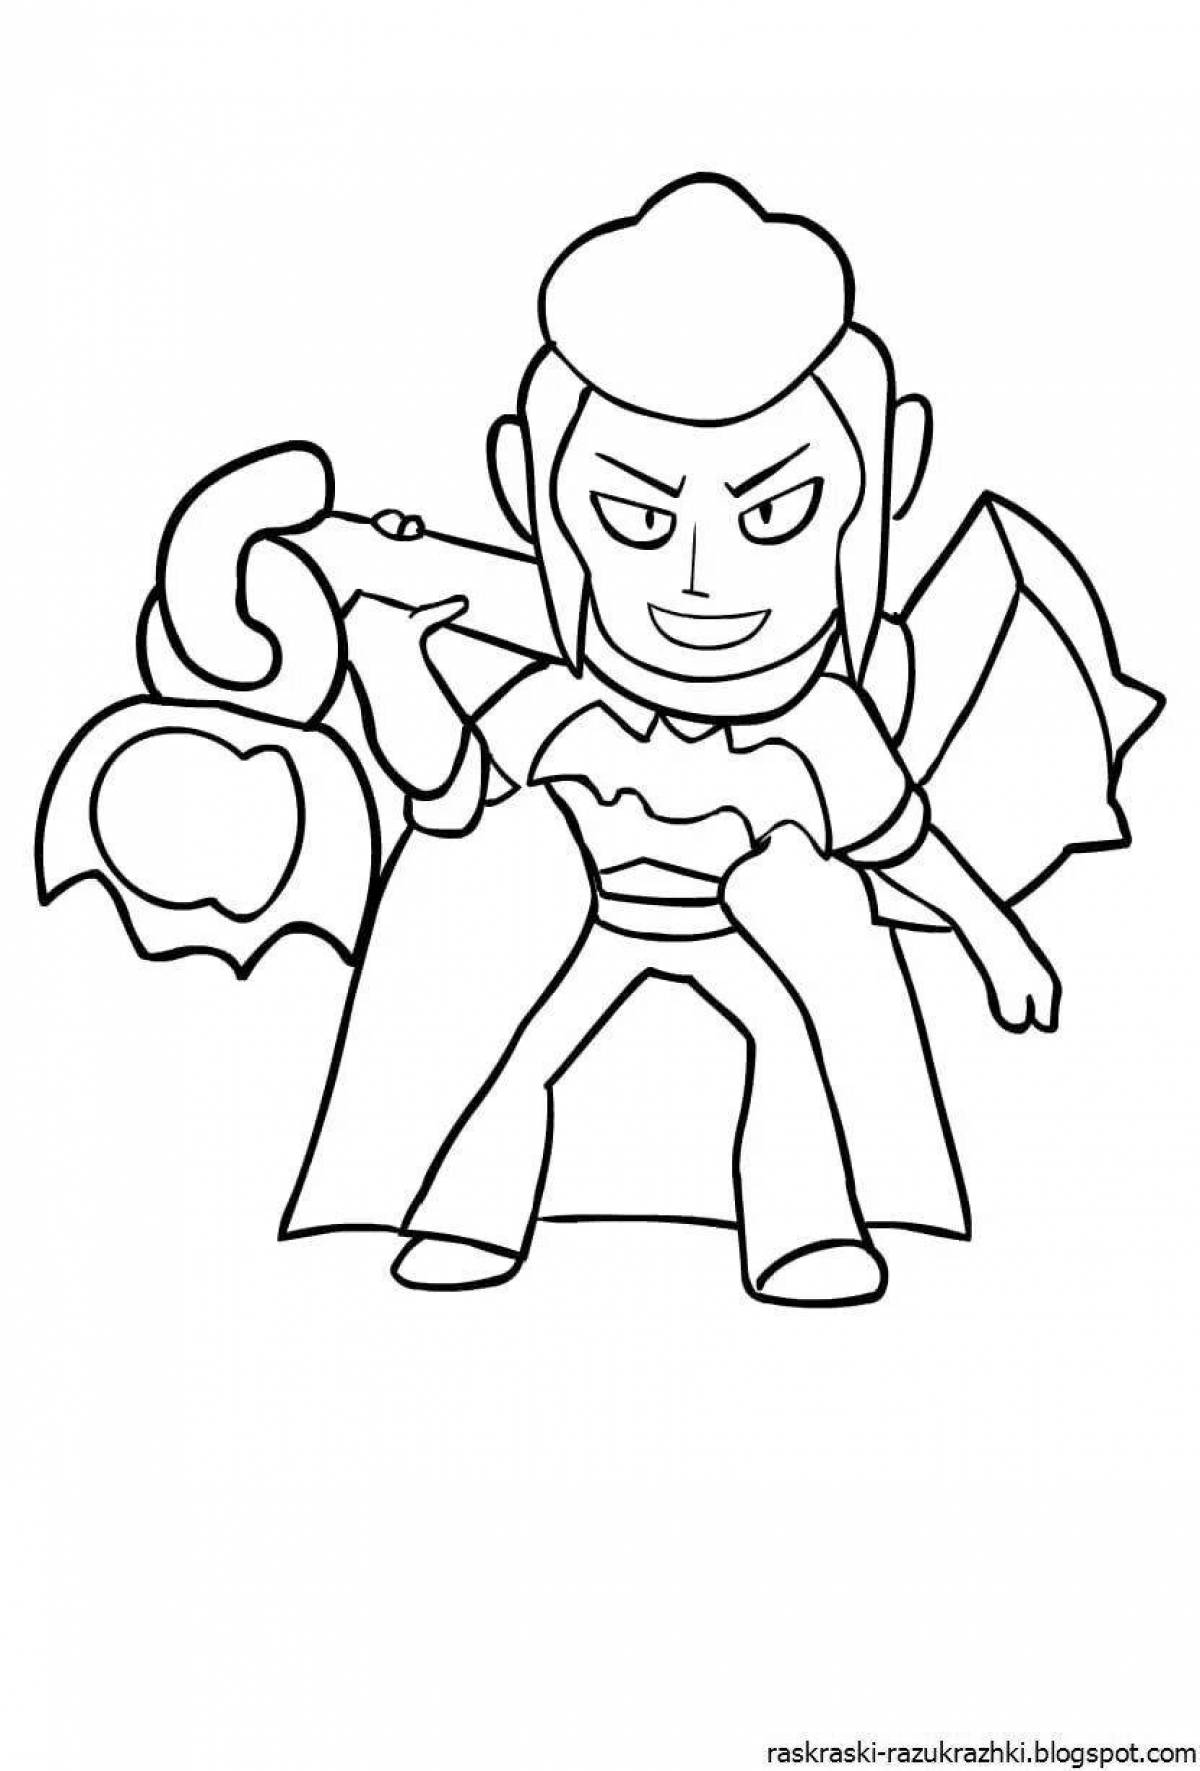 Awesome fighter icons coloring page